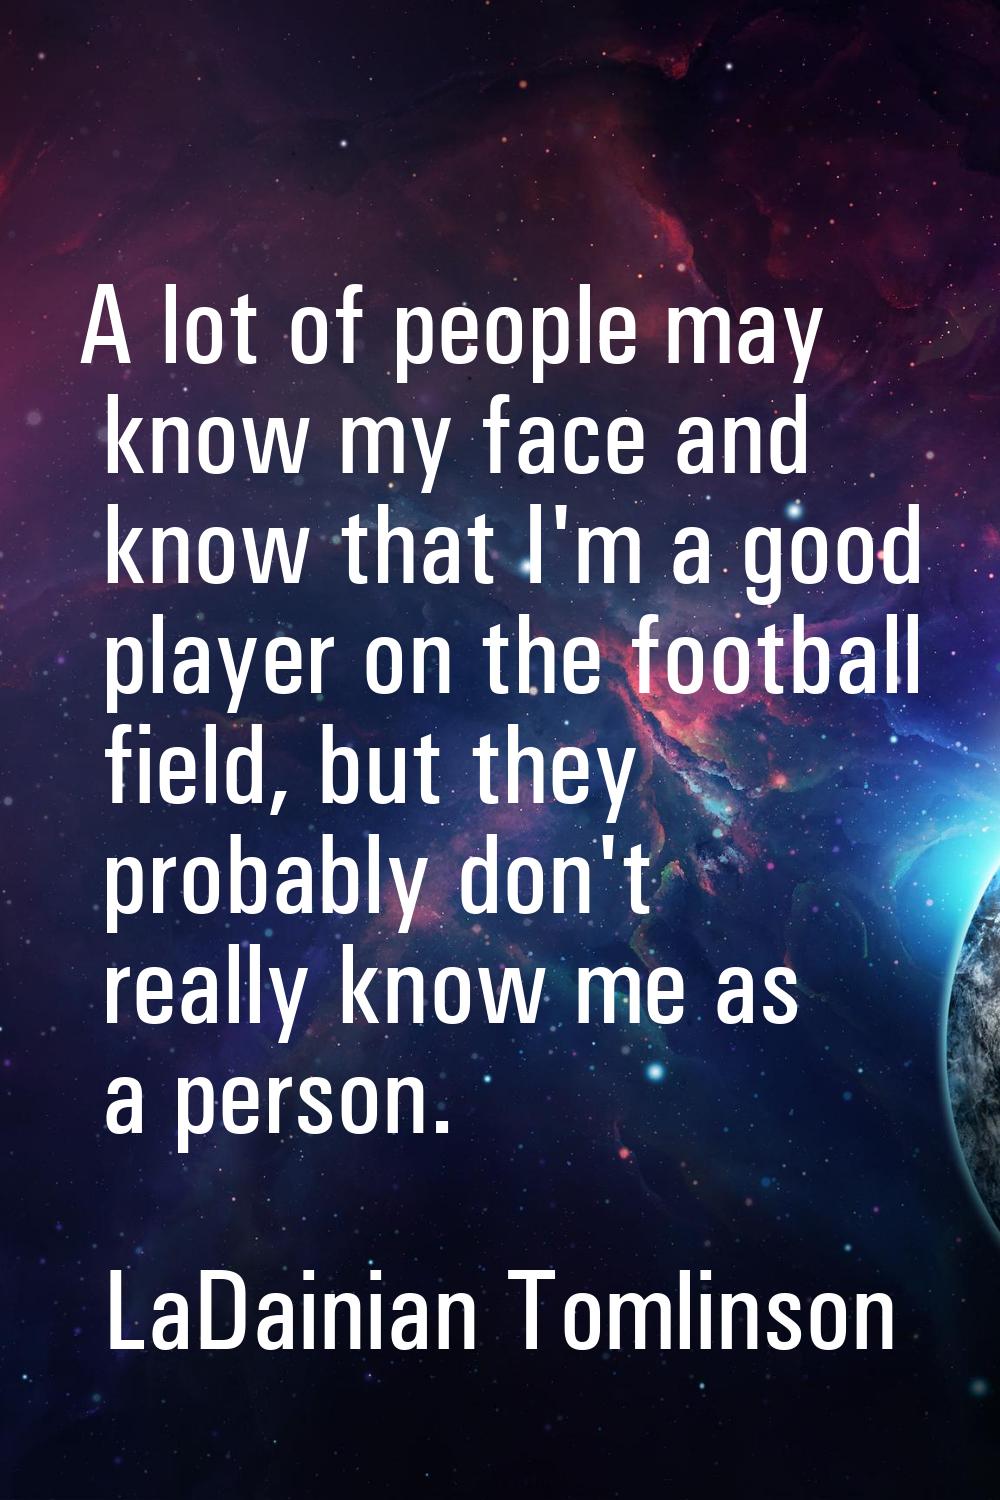 A lot of people may know my face and know that I'm a good player on the football field, but they pr